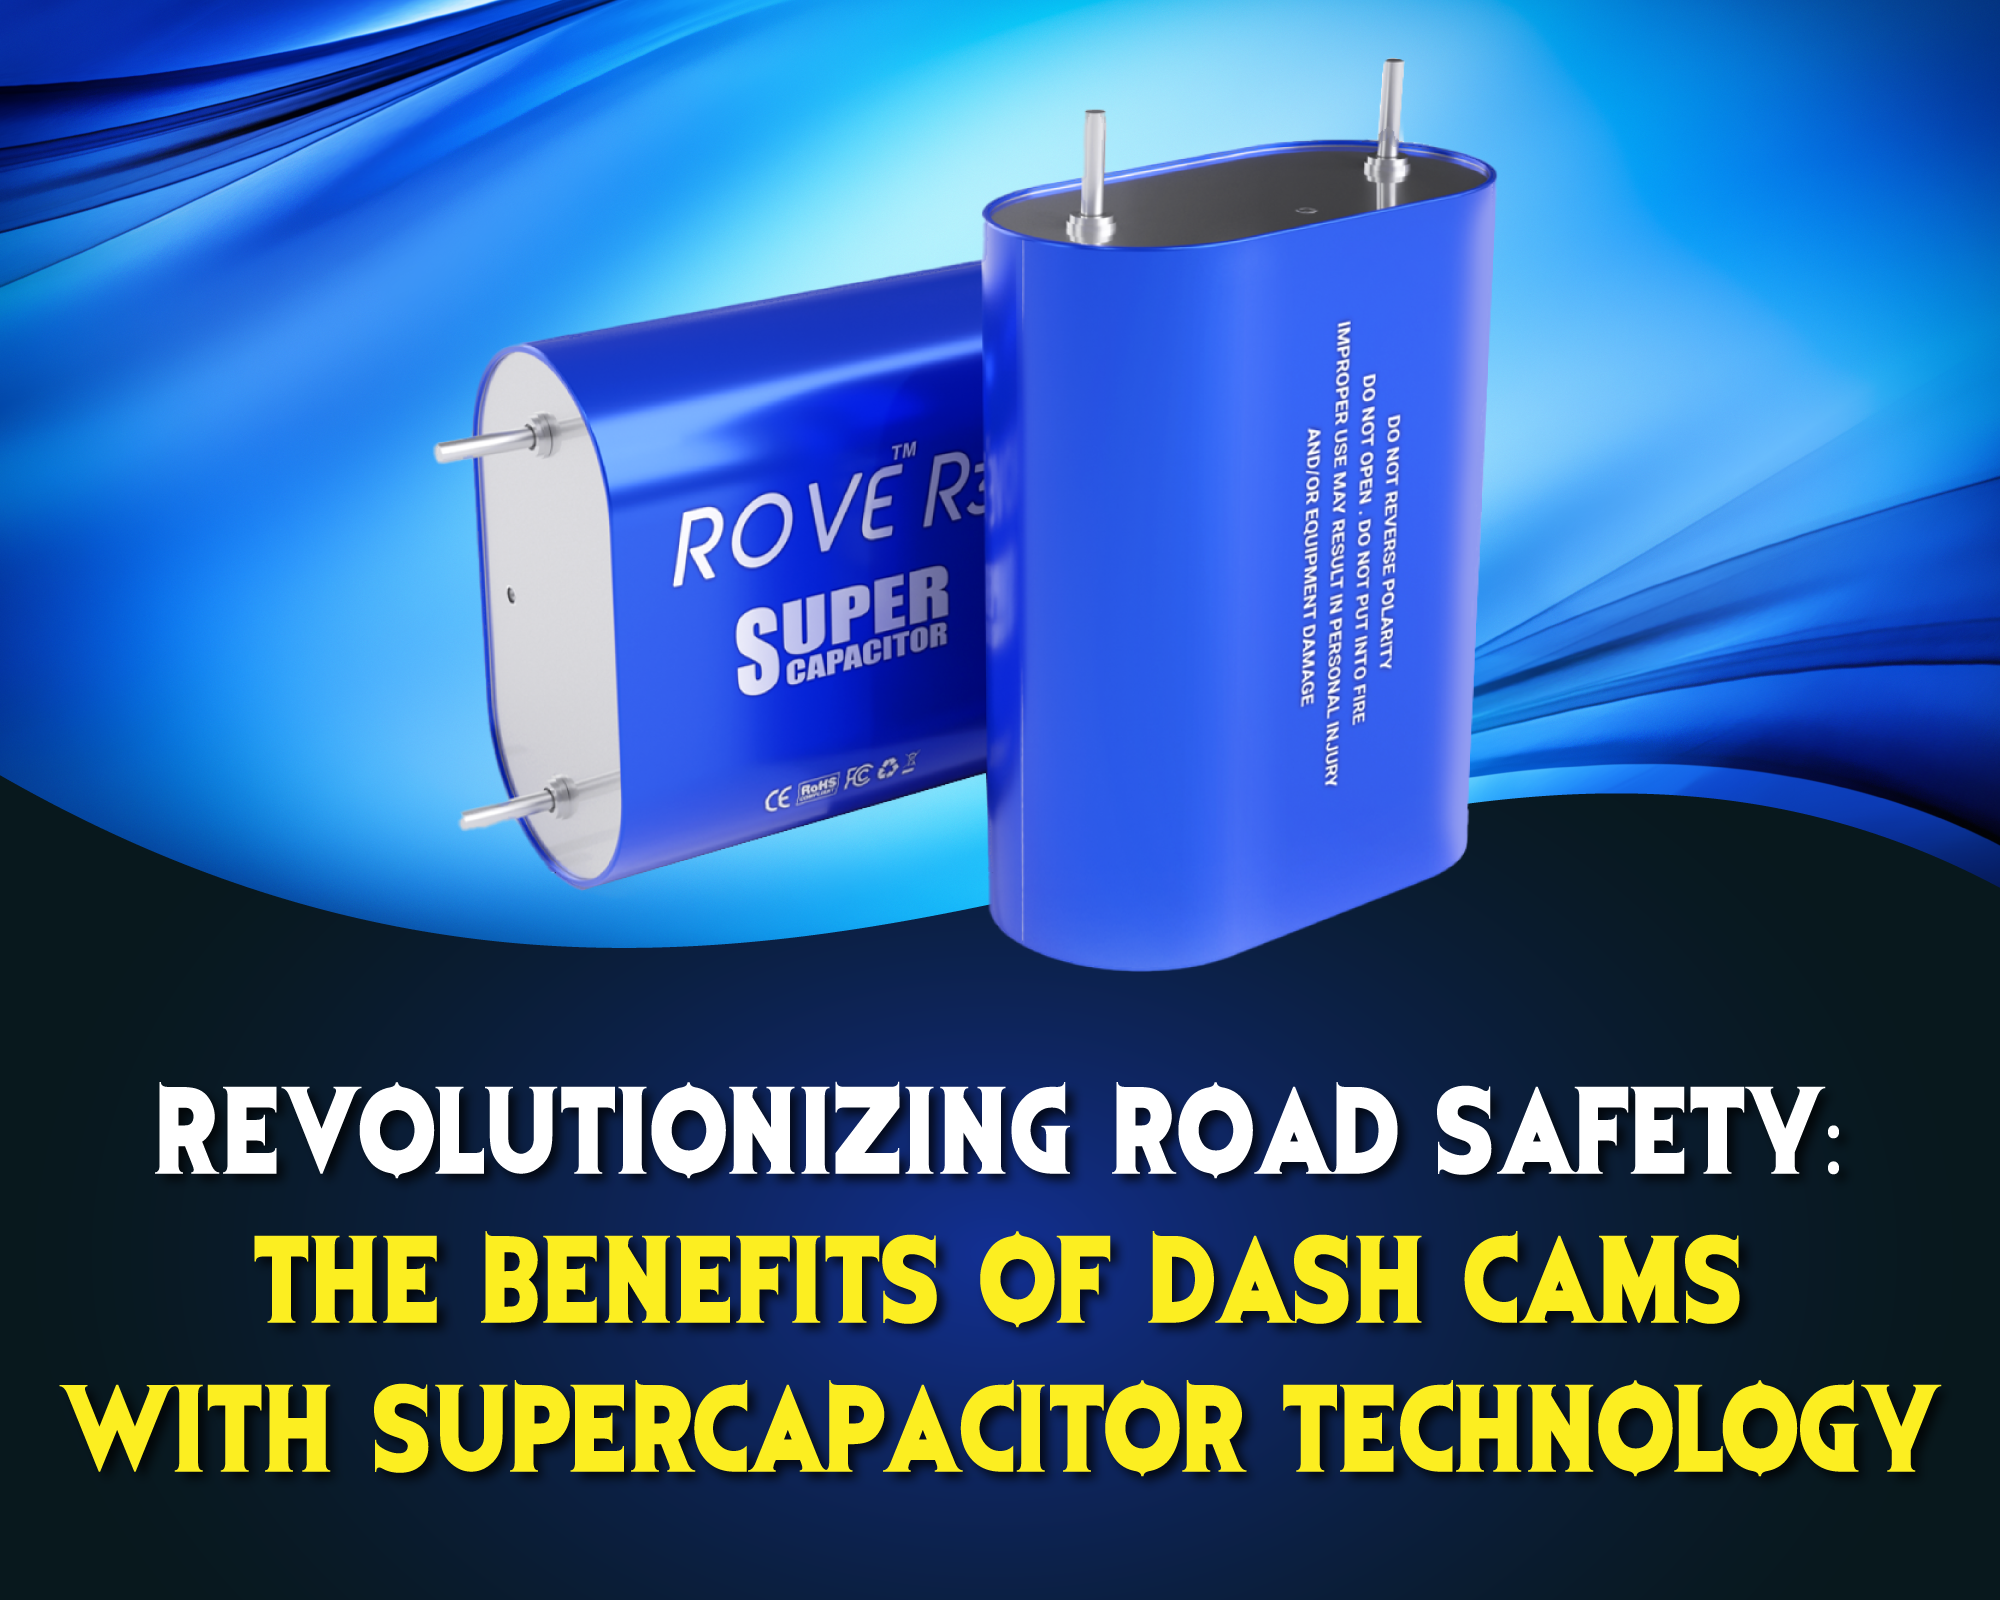 Revolutionizing Road Safety: The Benefits of Dash Cams With Supercapacitor Technology